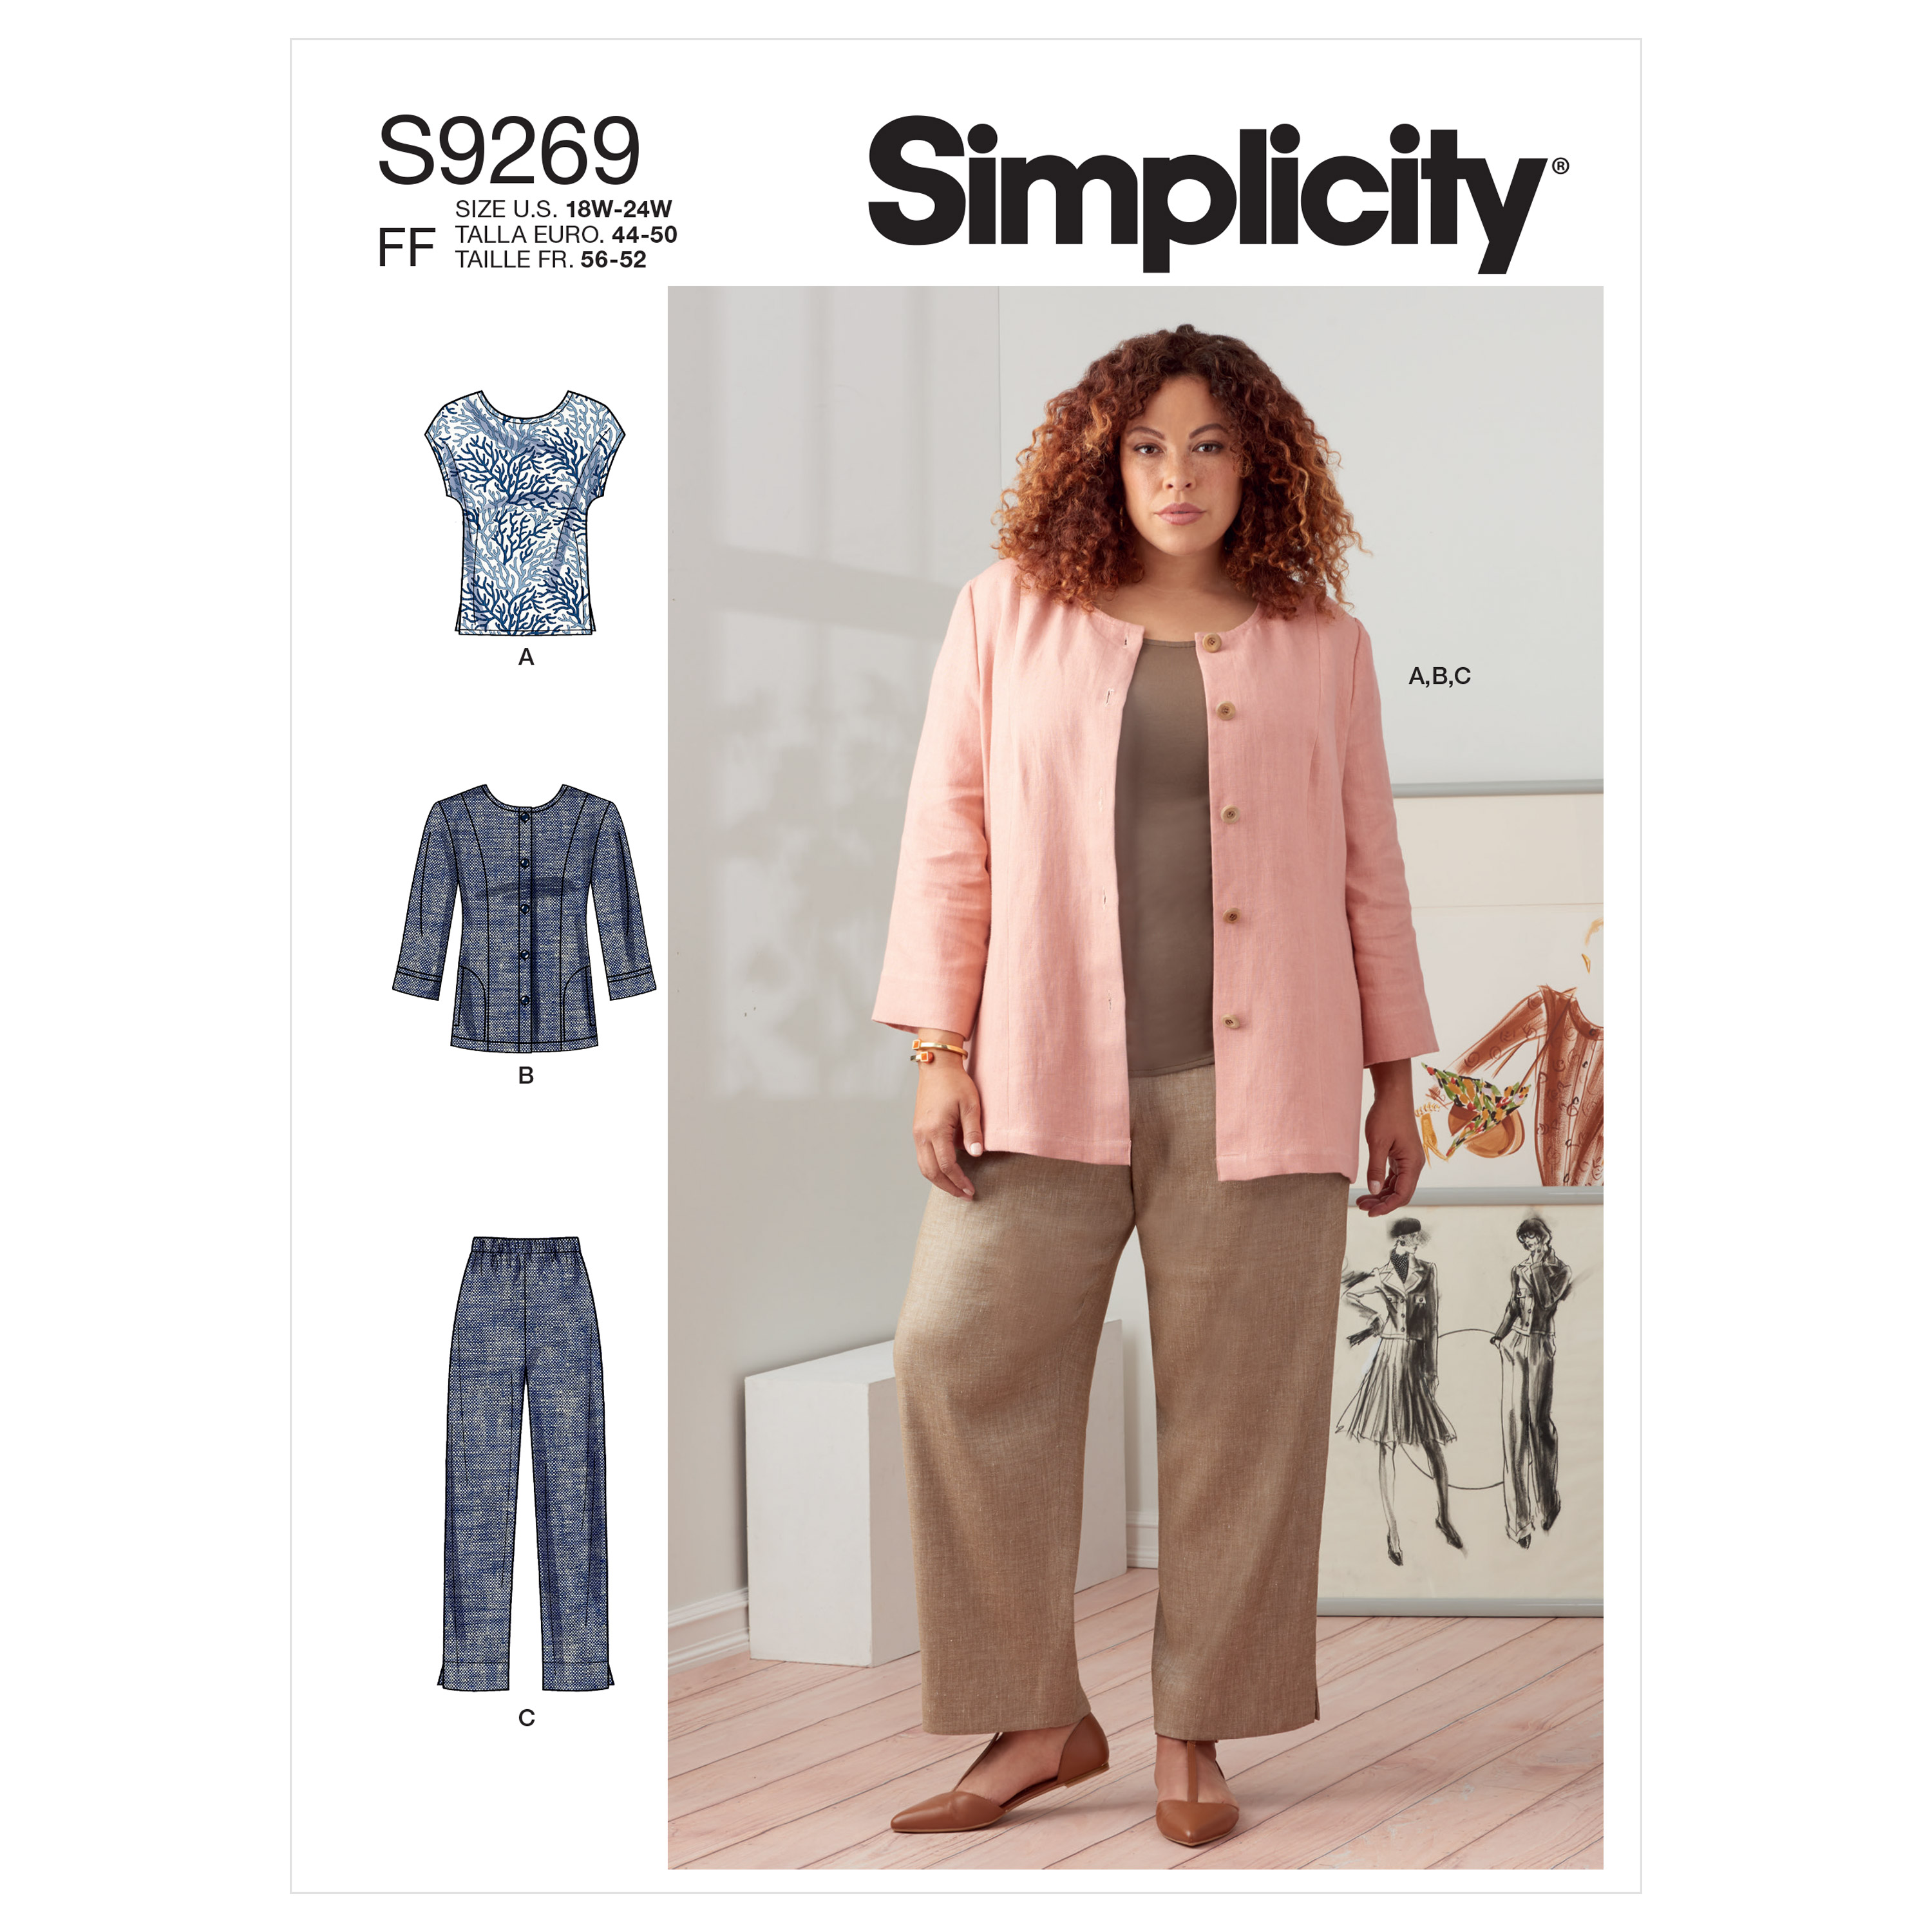 Simplicity Sewing Pattern S9929 Misses' and Women's Lounge Set by